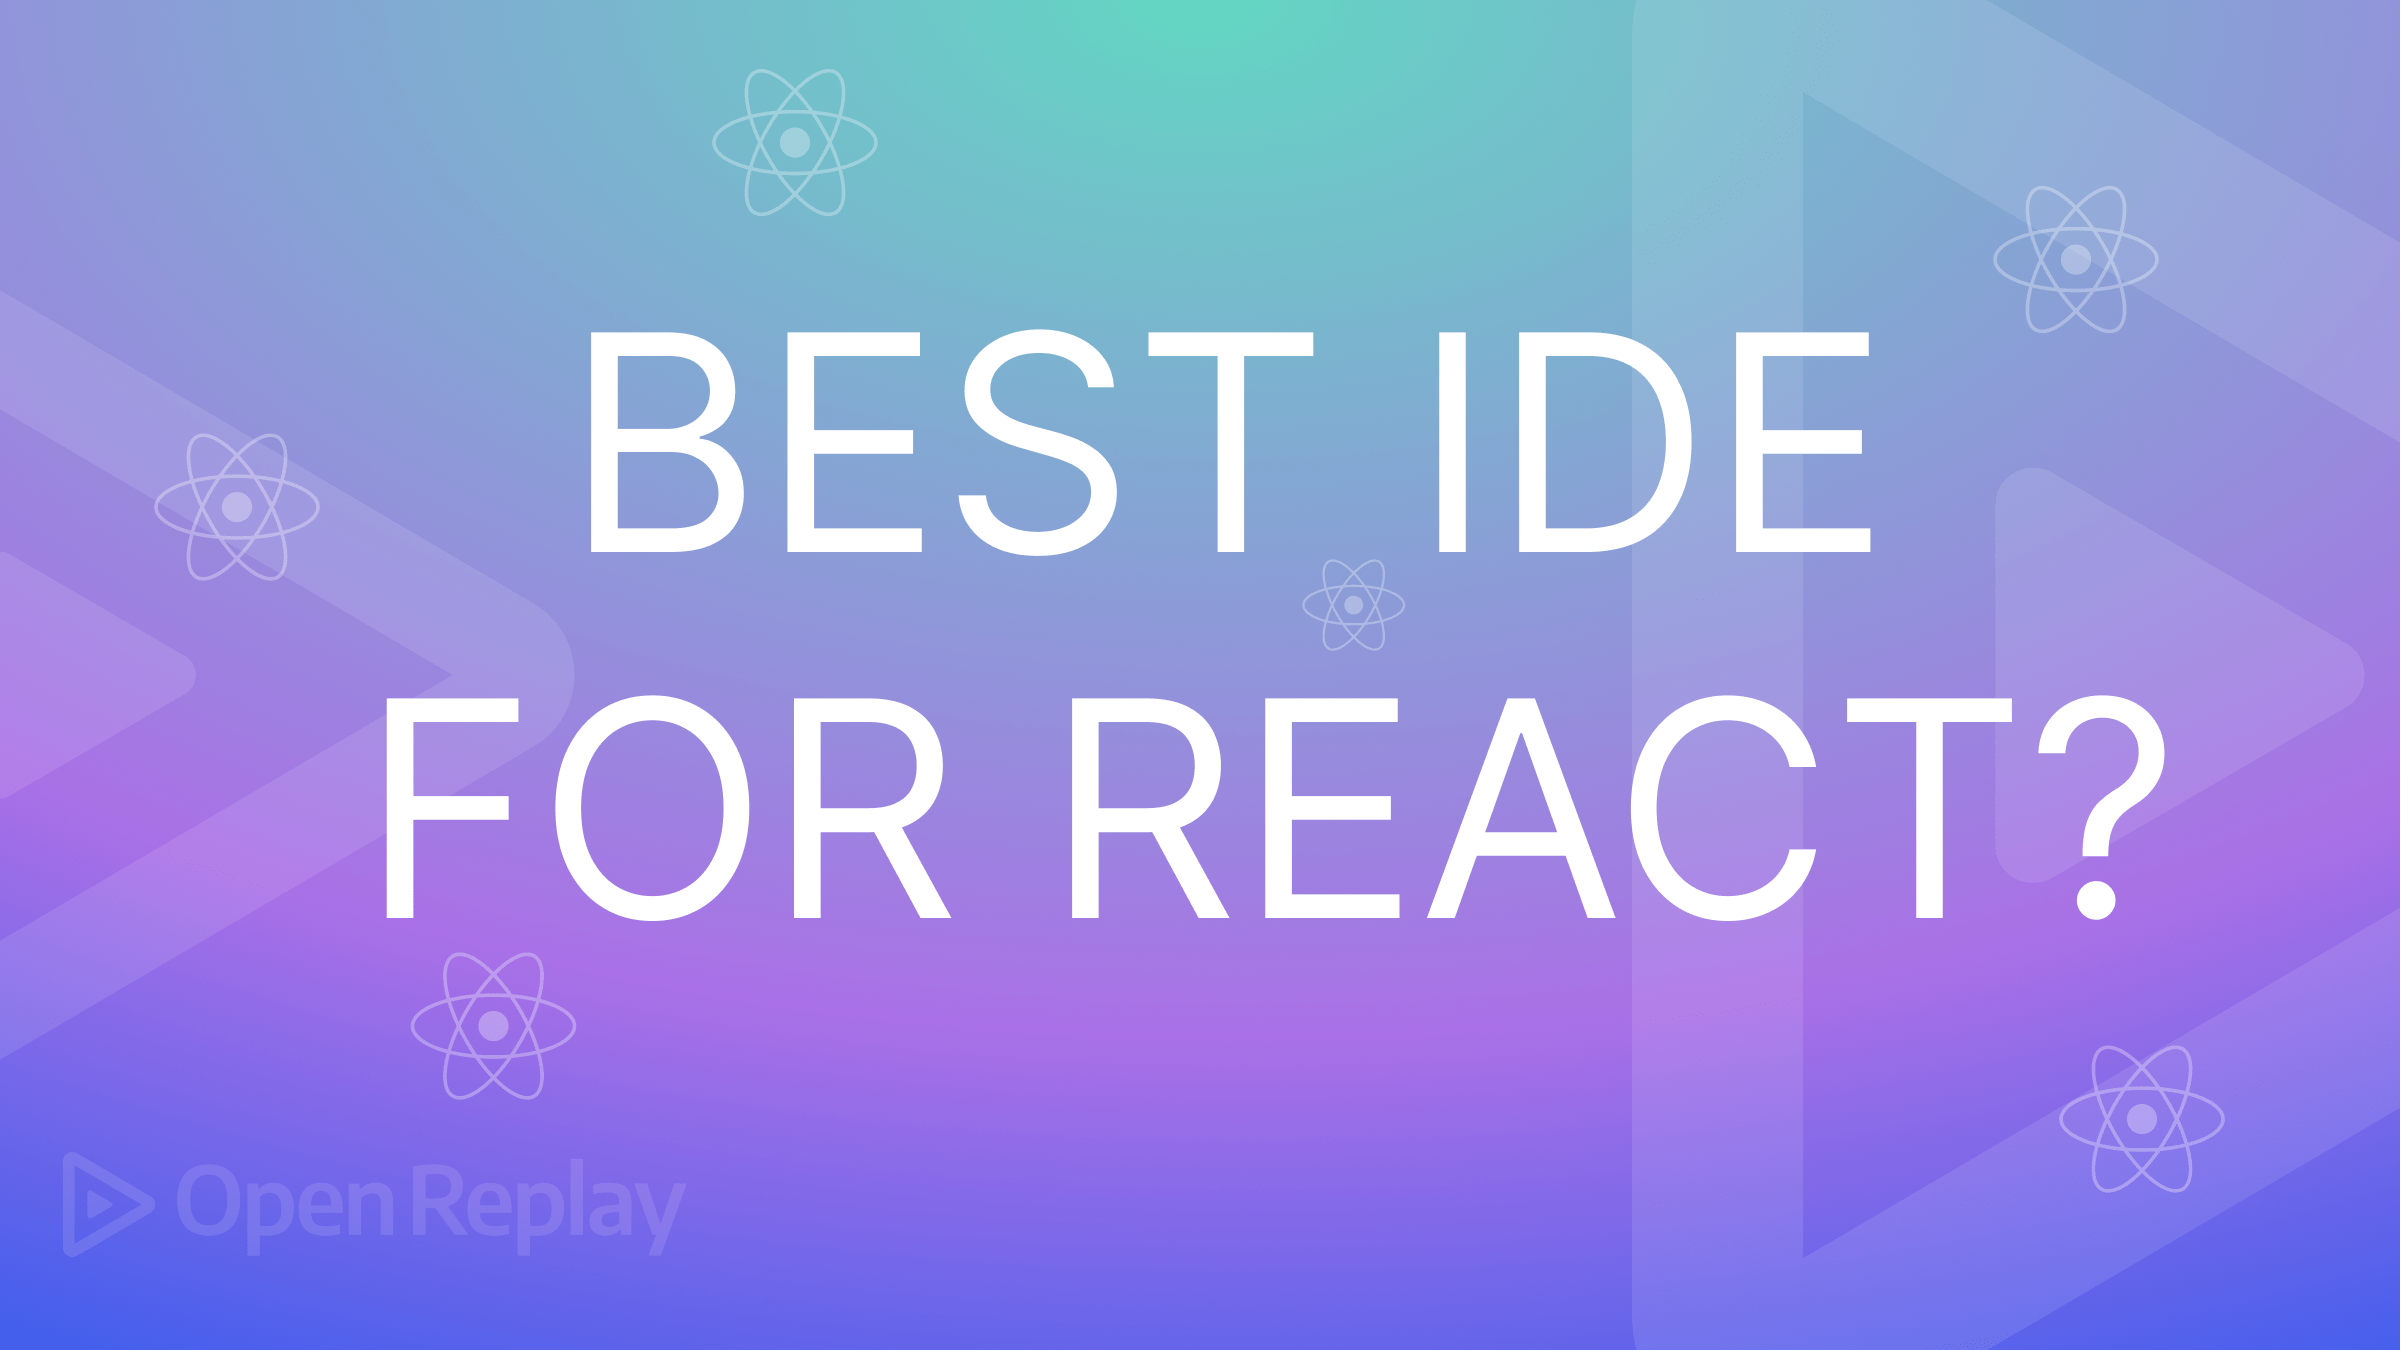 What Is the Best IDE for React?